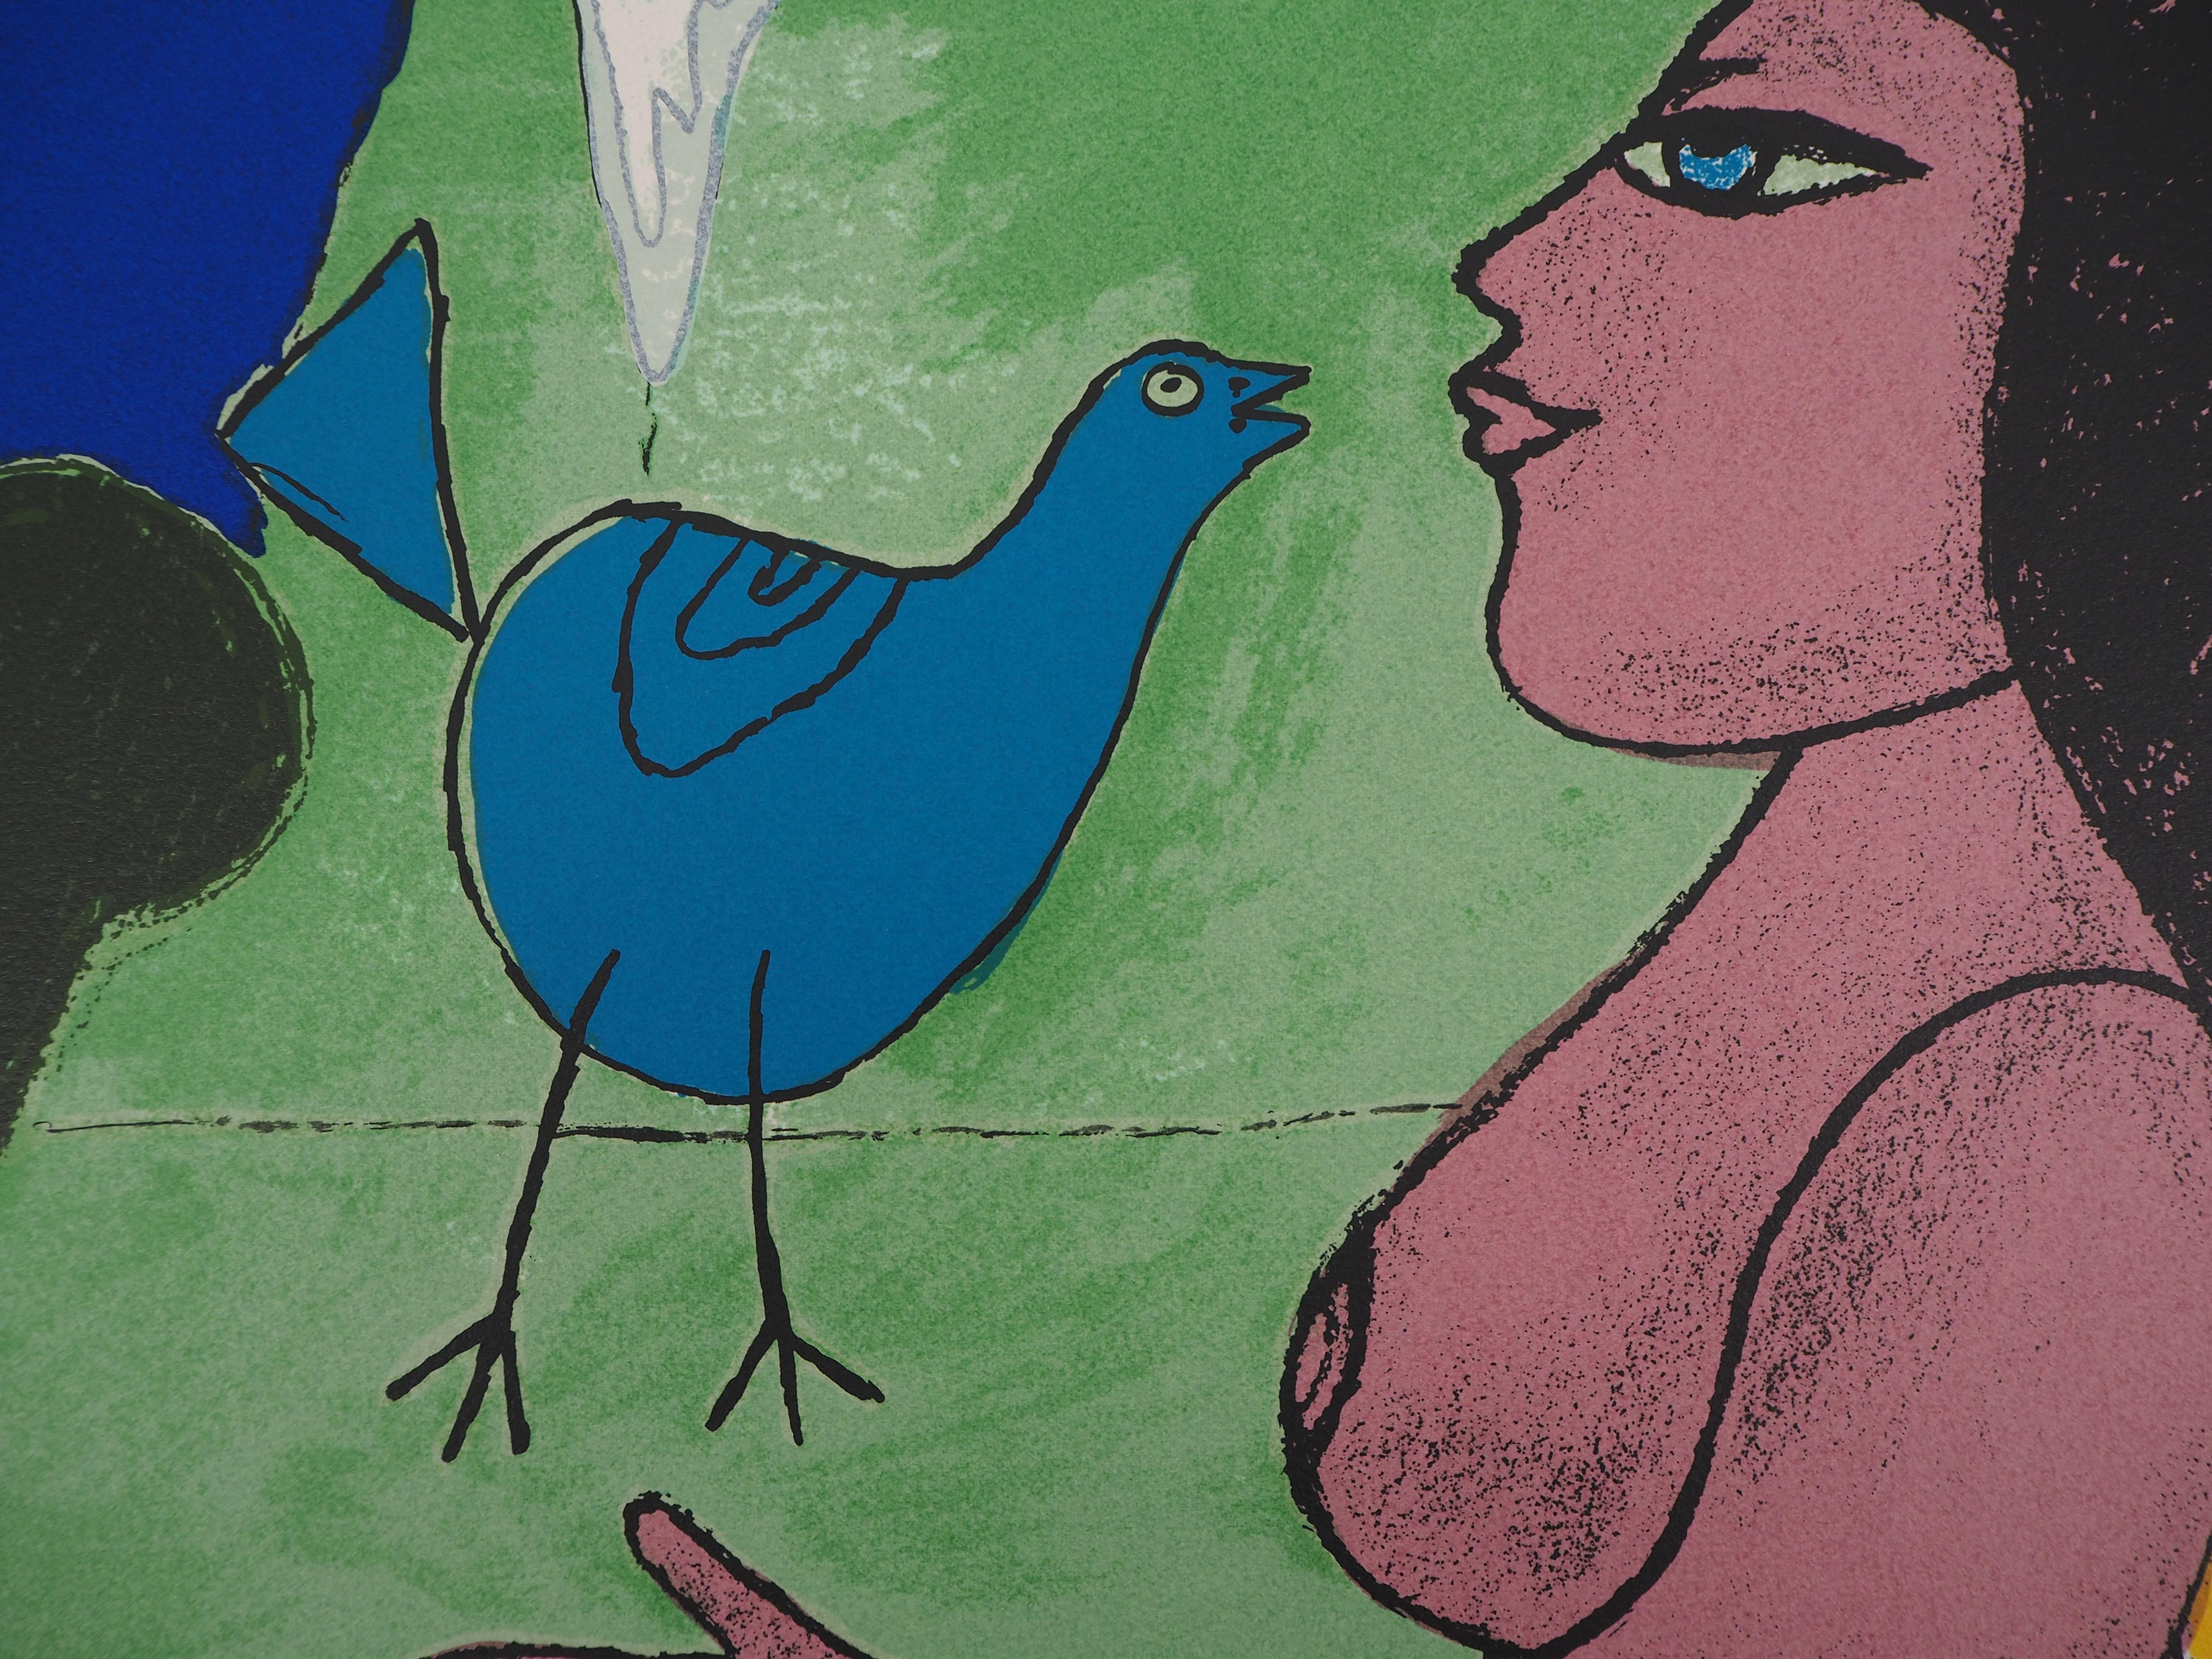 Dreaming Nude and Blue Bird - Original handsigned lithograph - Surrealist Print by Corneille